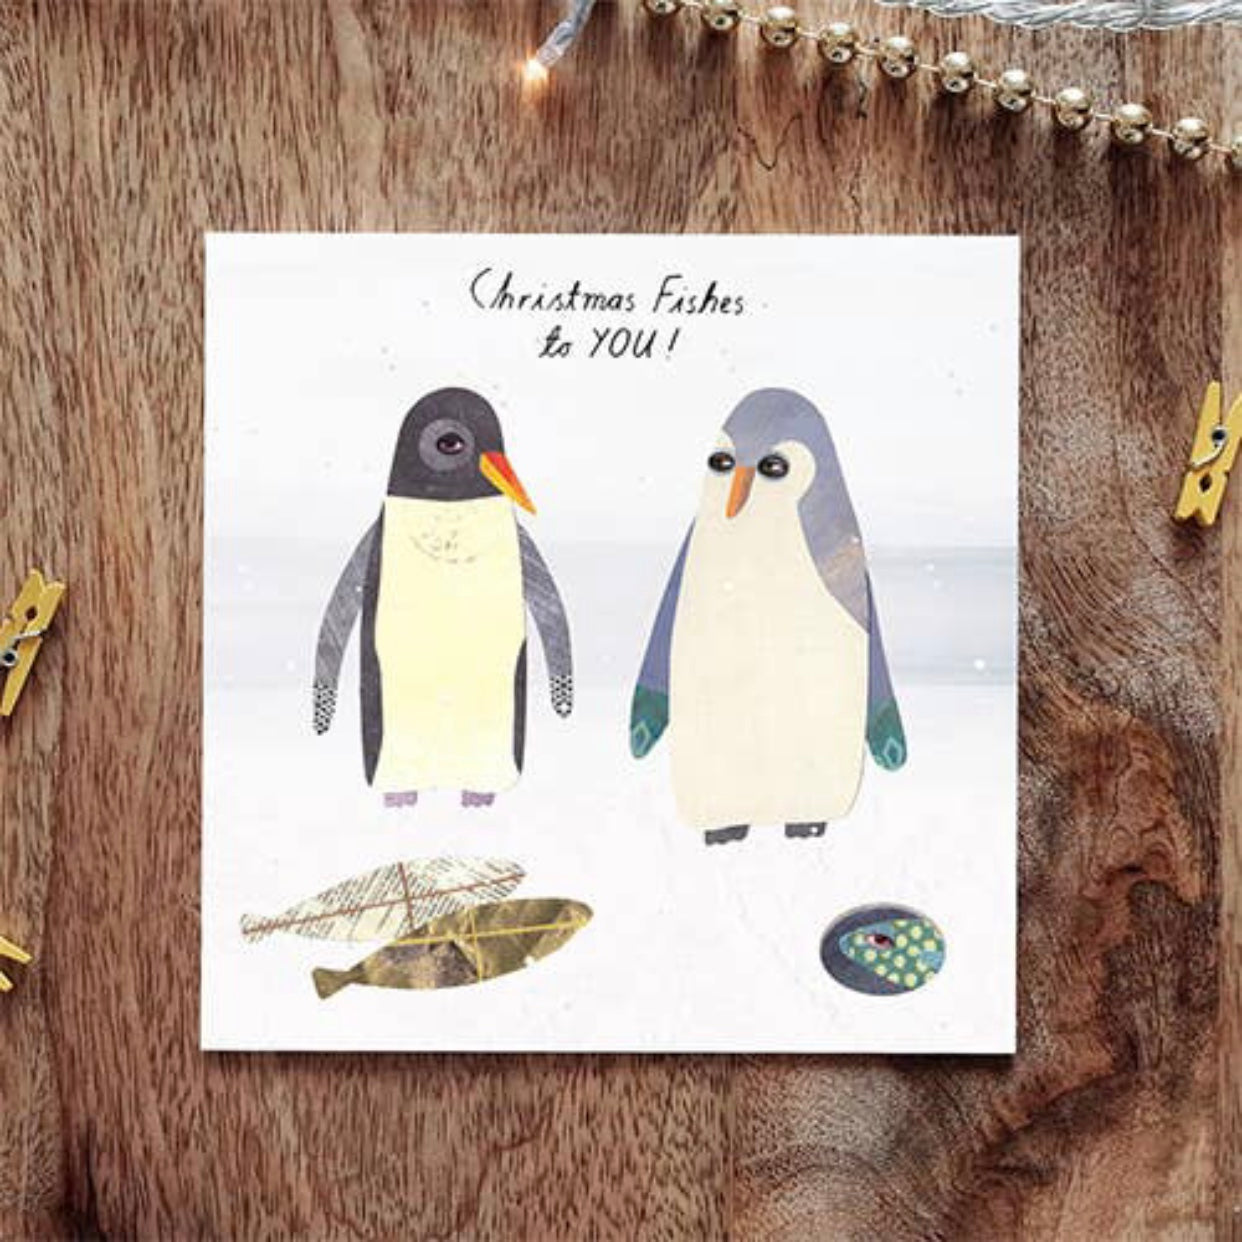 Christmas fishes to you greeting card